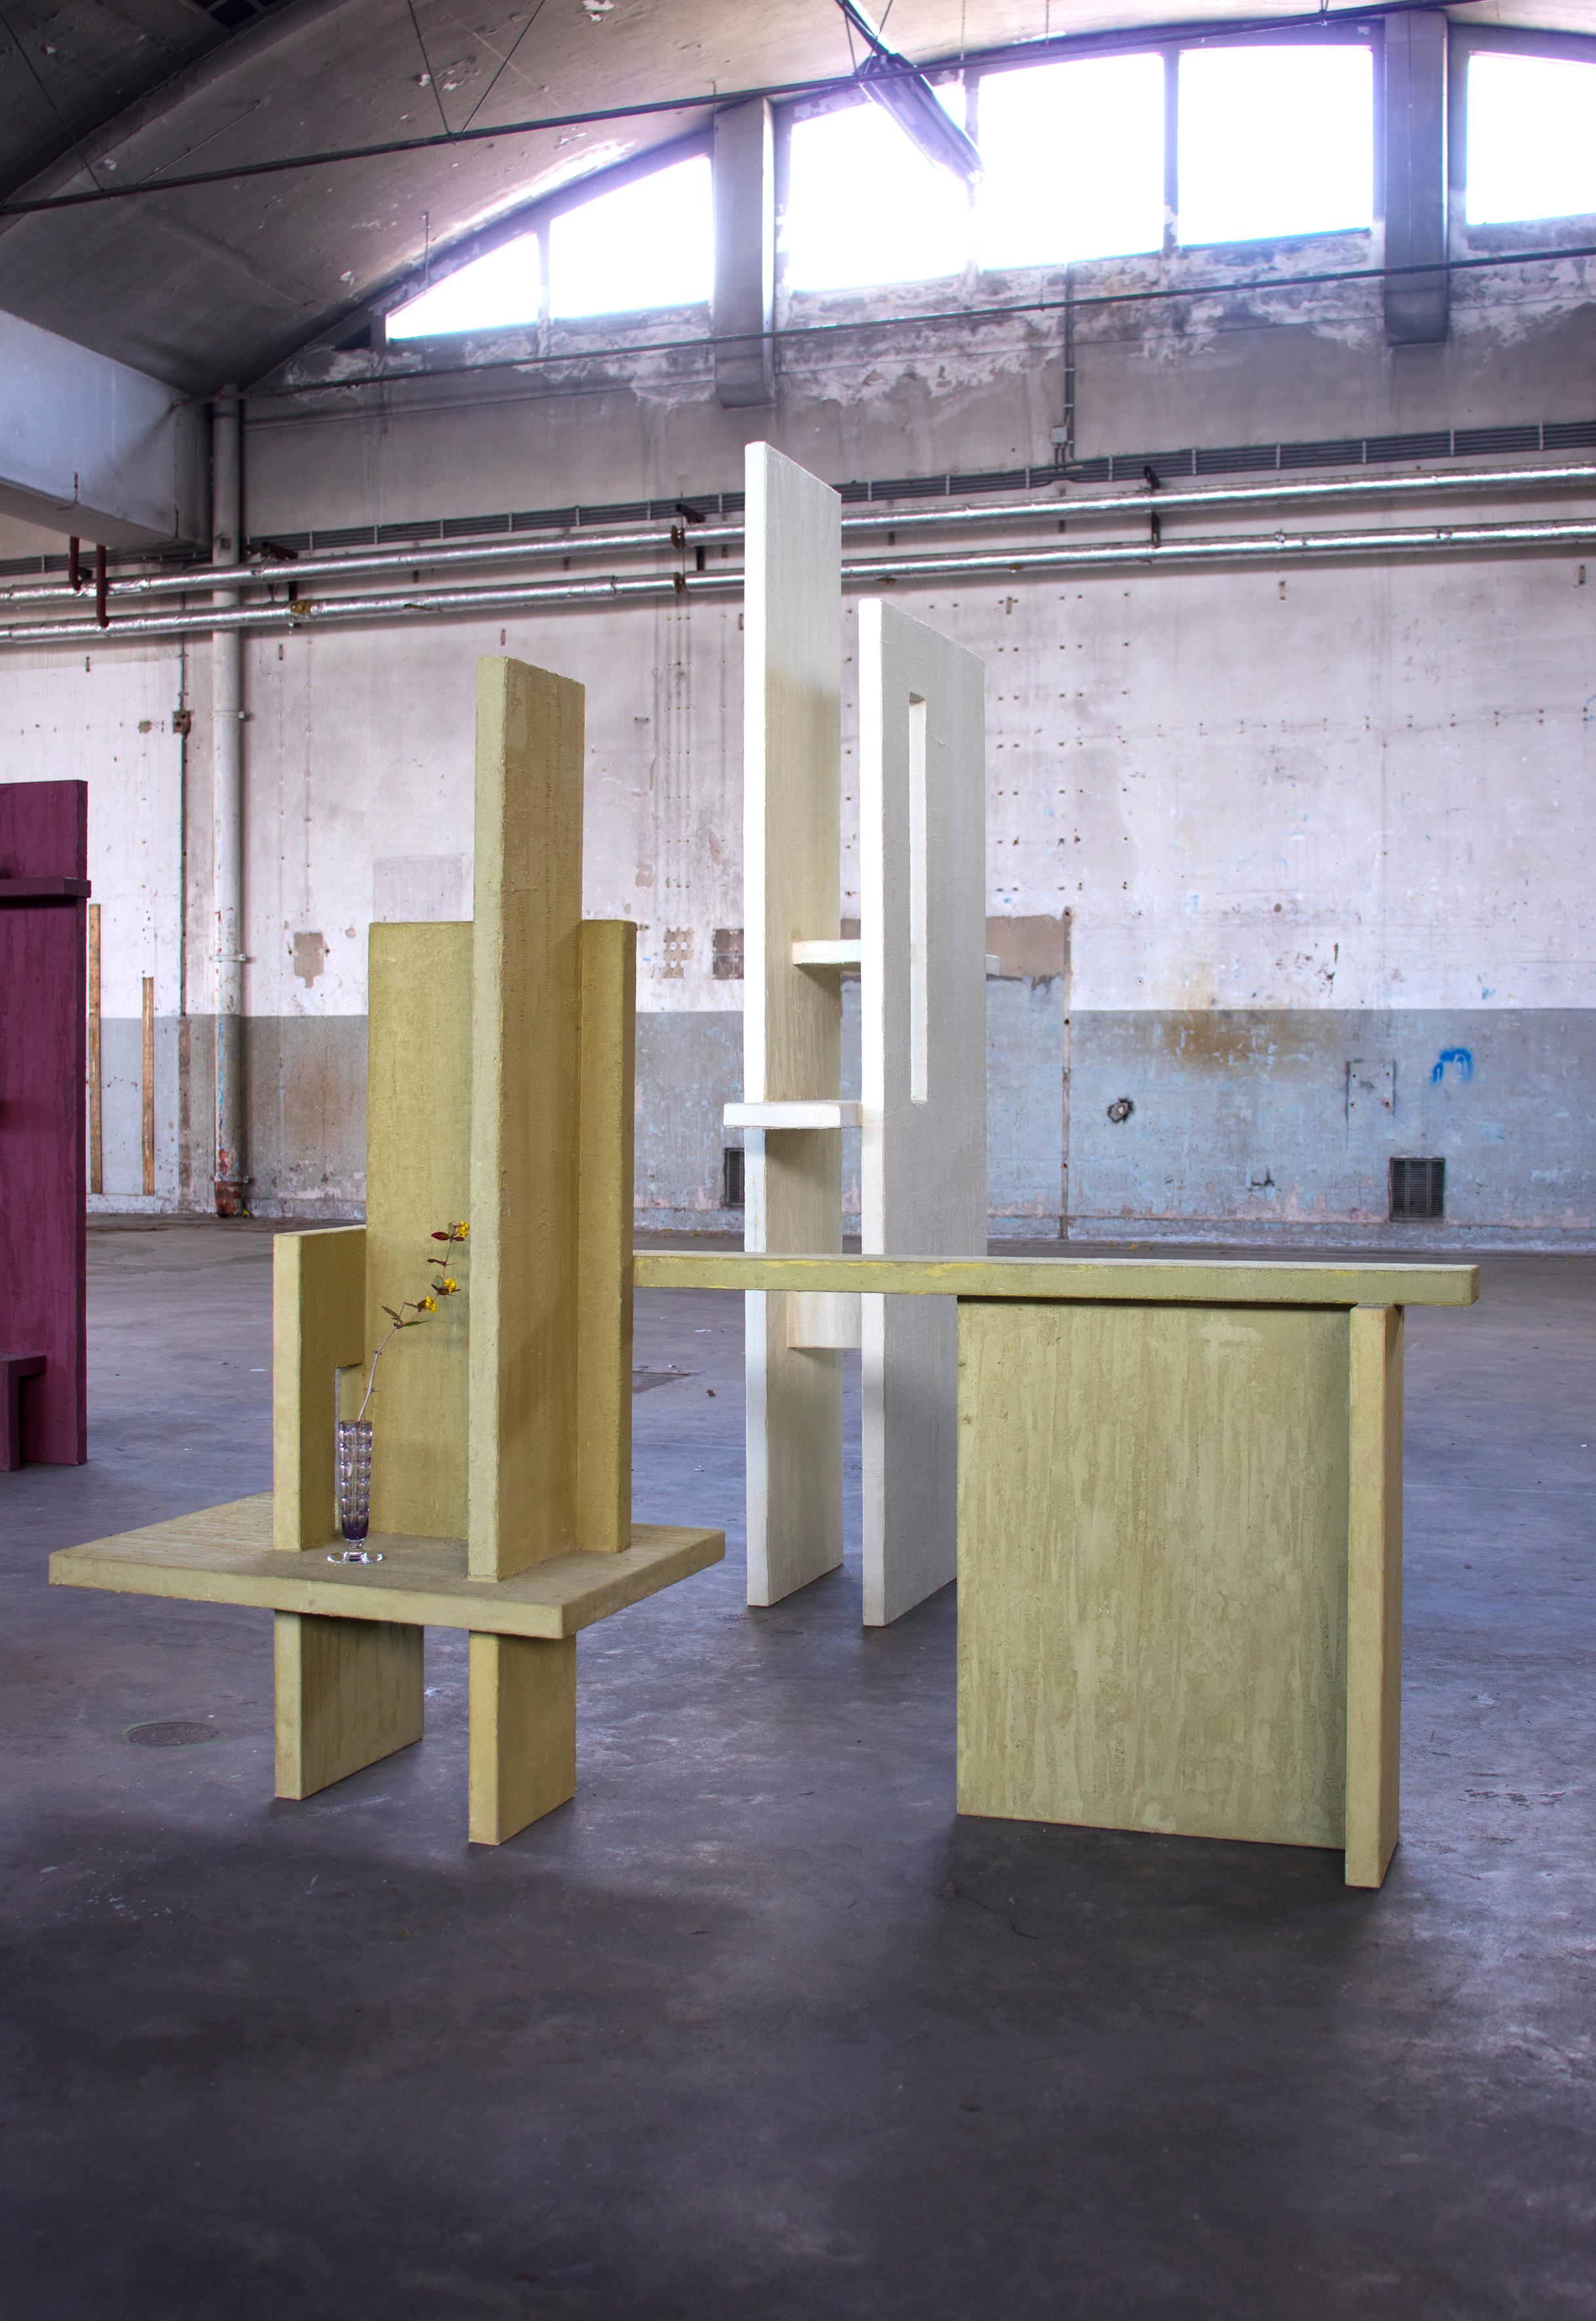 Space Poetry is a collection of sculptural objects in which Kiki van Eijk researches the relationship between space and architecture. Her findings are translating into a series of pieces: room dividers. Bookshelves. Accent table. Entry consoles that